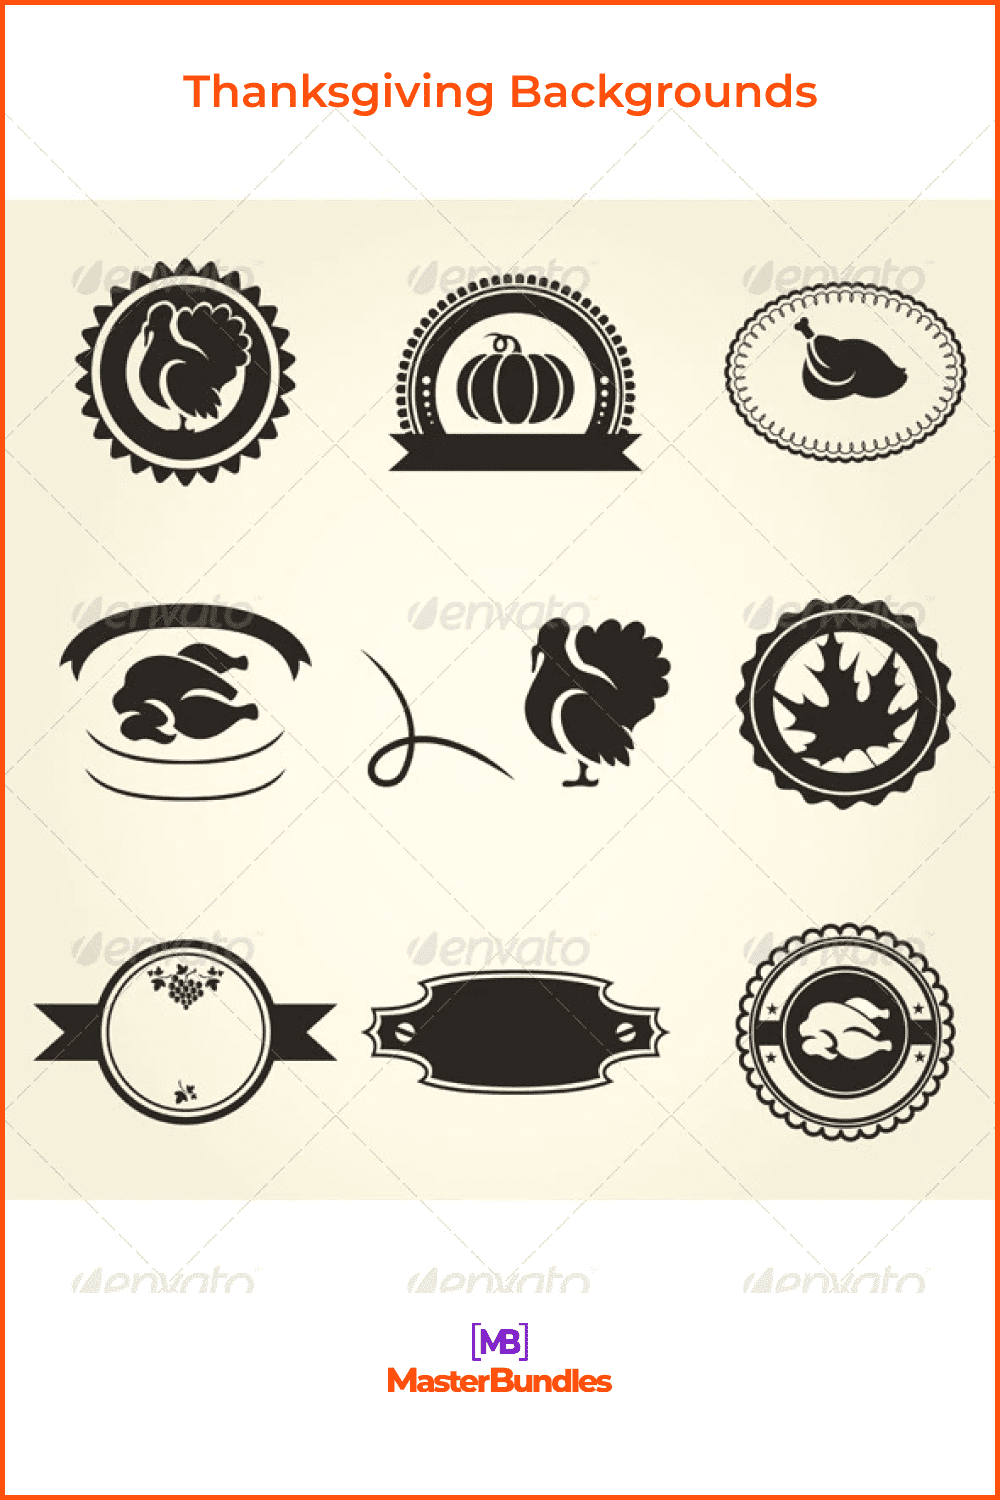 Thanksgiving backgrounds.